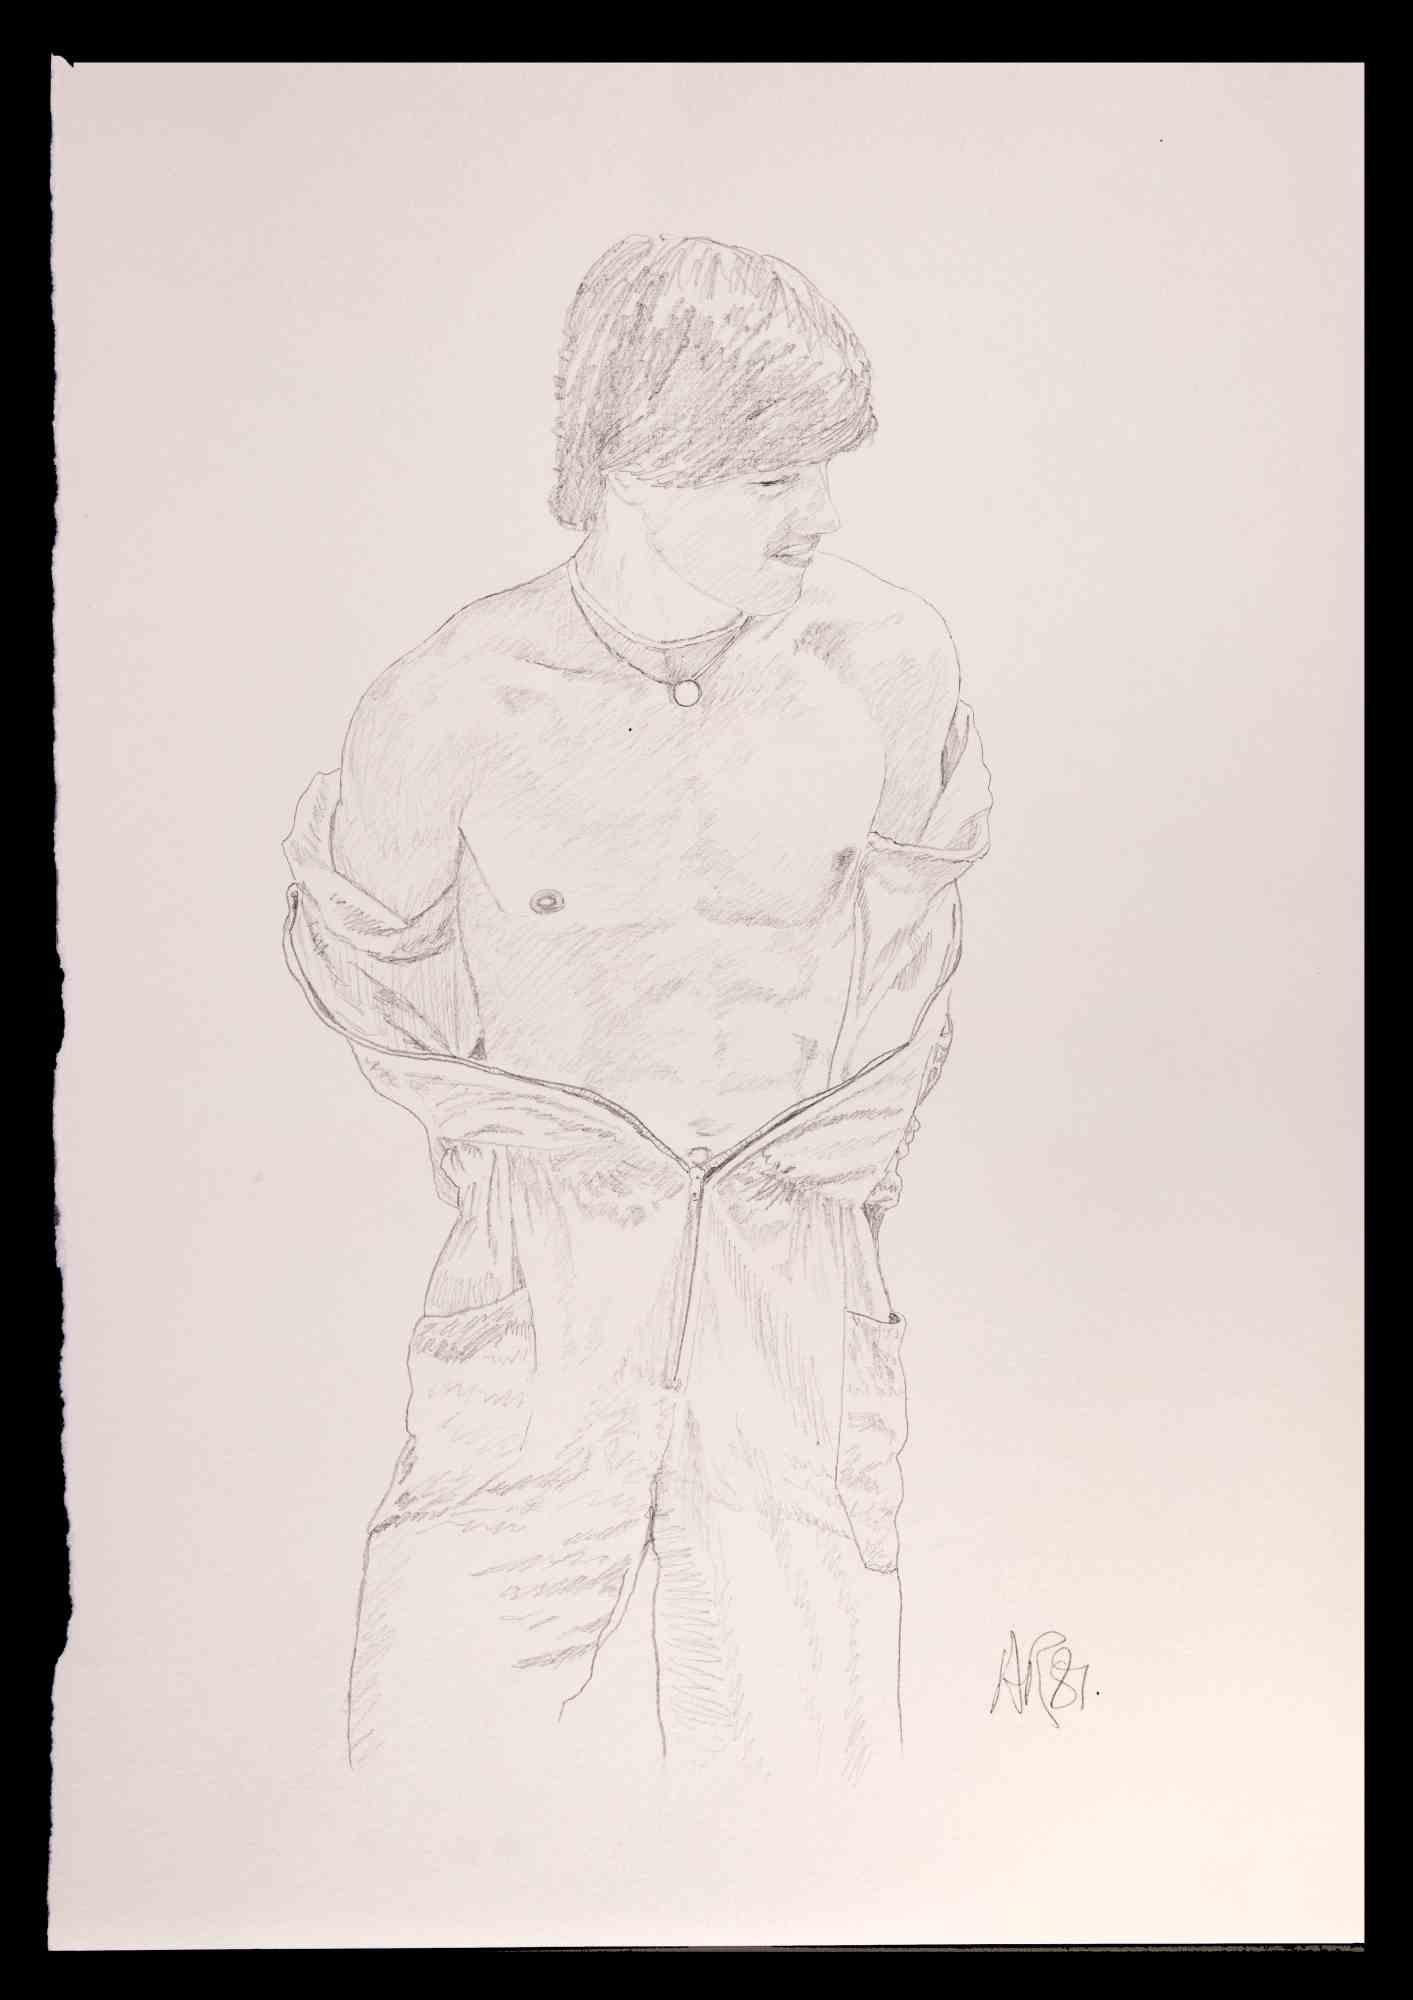 Portrait of a boy  is an original drawing on pencil realized by Anthony Roaland in 1981. Hand-signed and dated by the artist on the lower right margin. 

The artwork represents a fresh and beautiful male portrait .

Good conditions.
